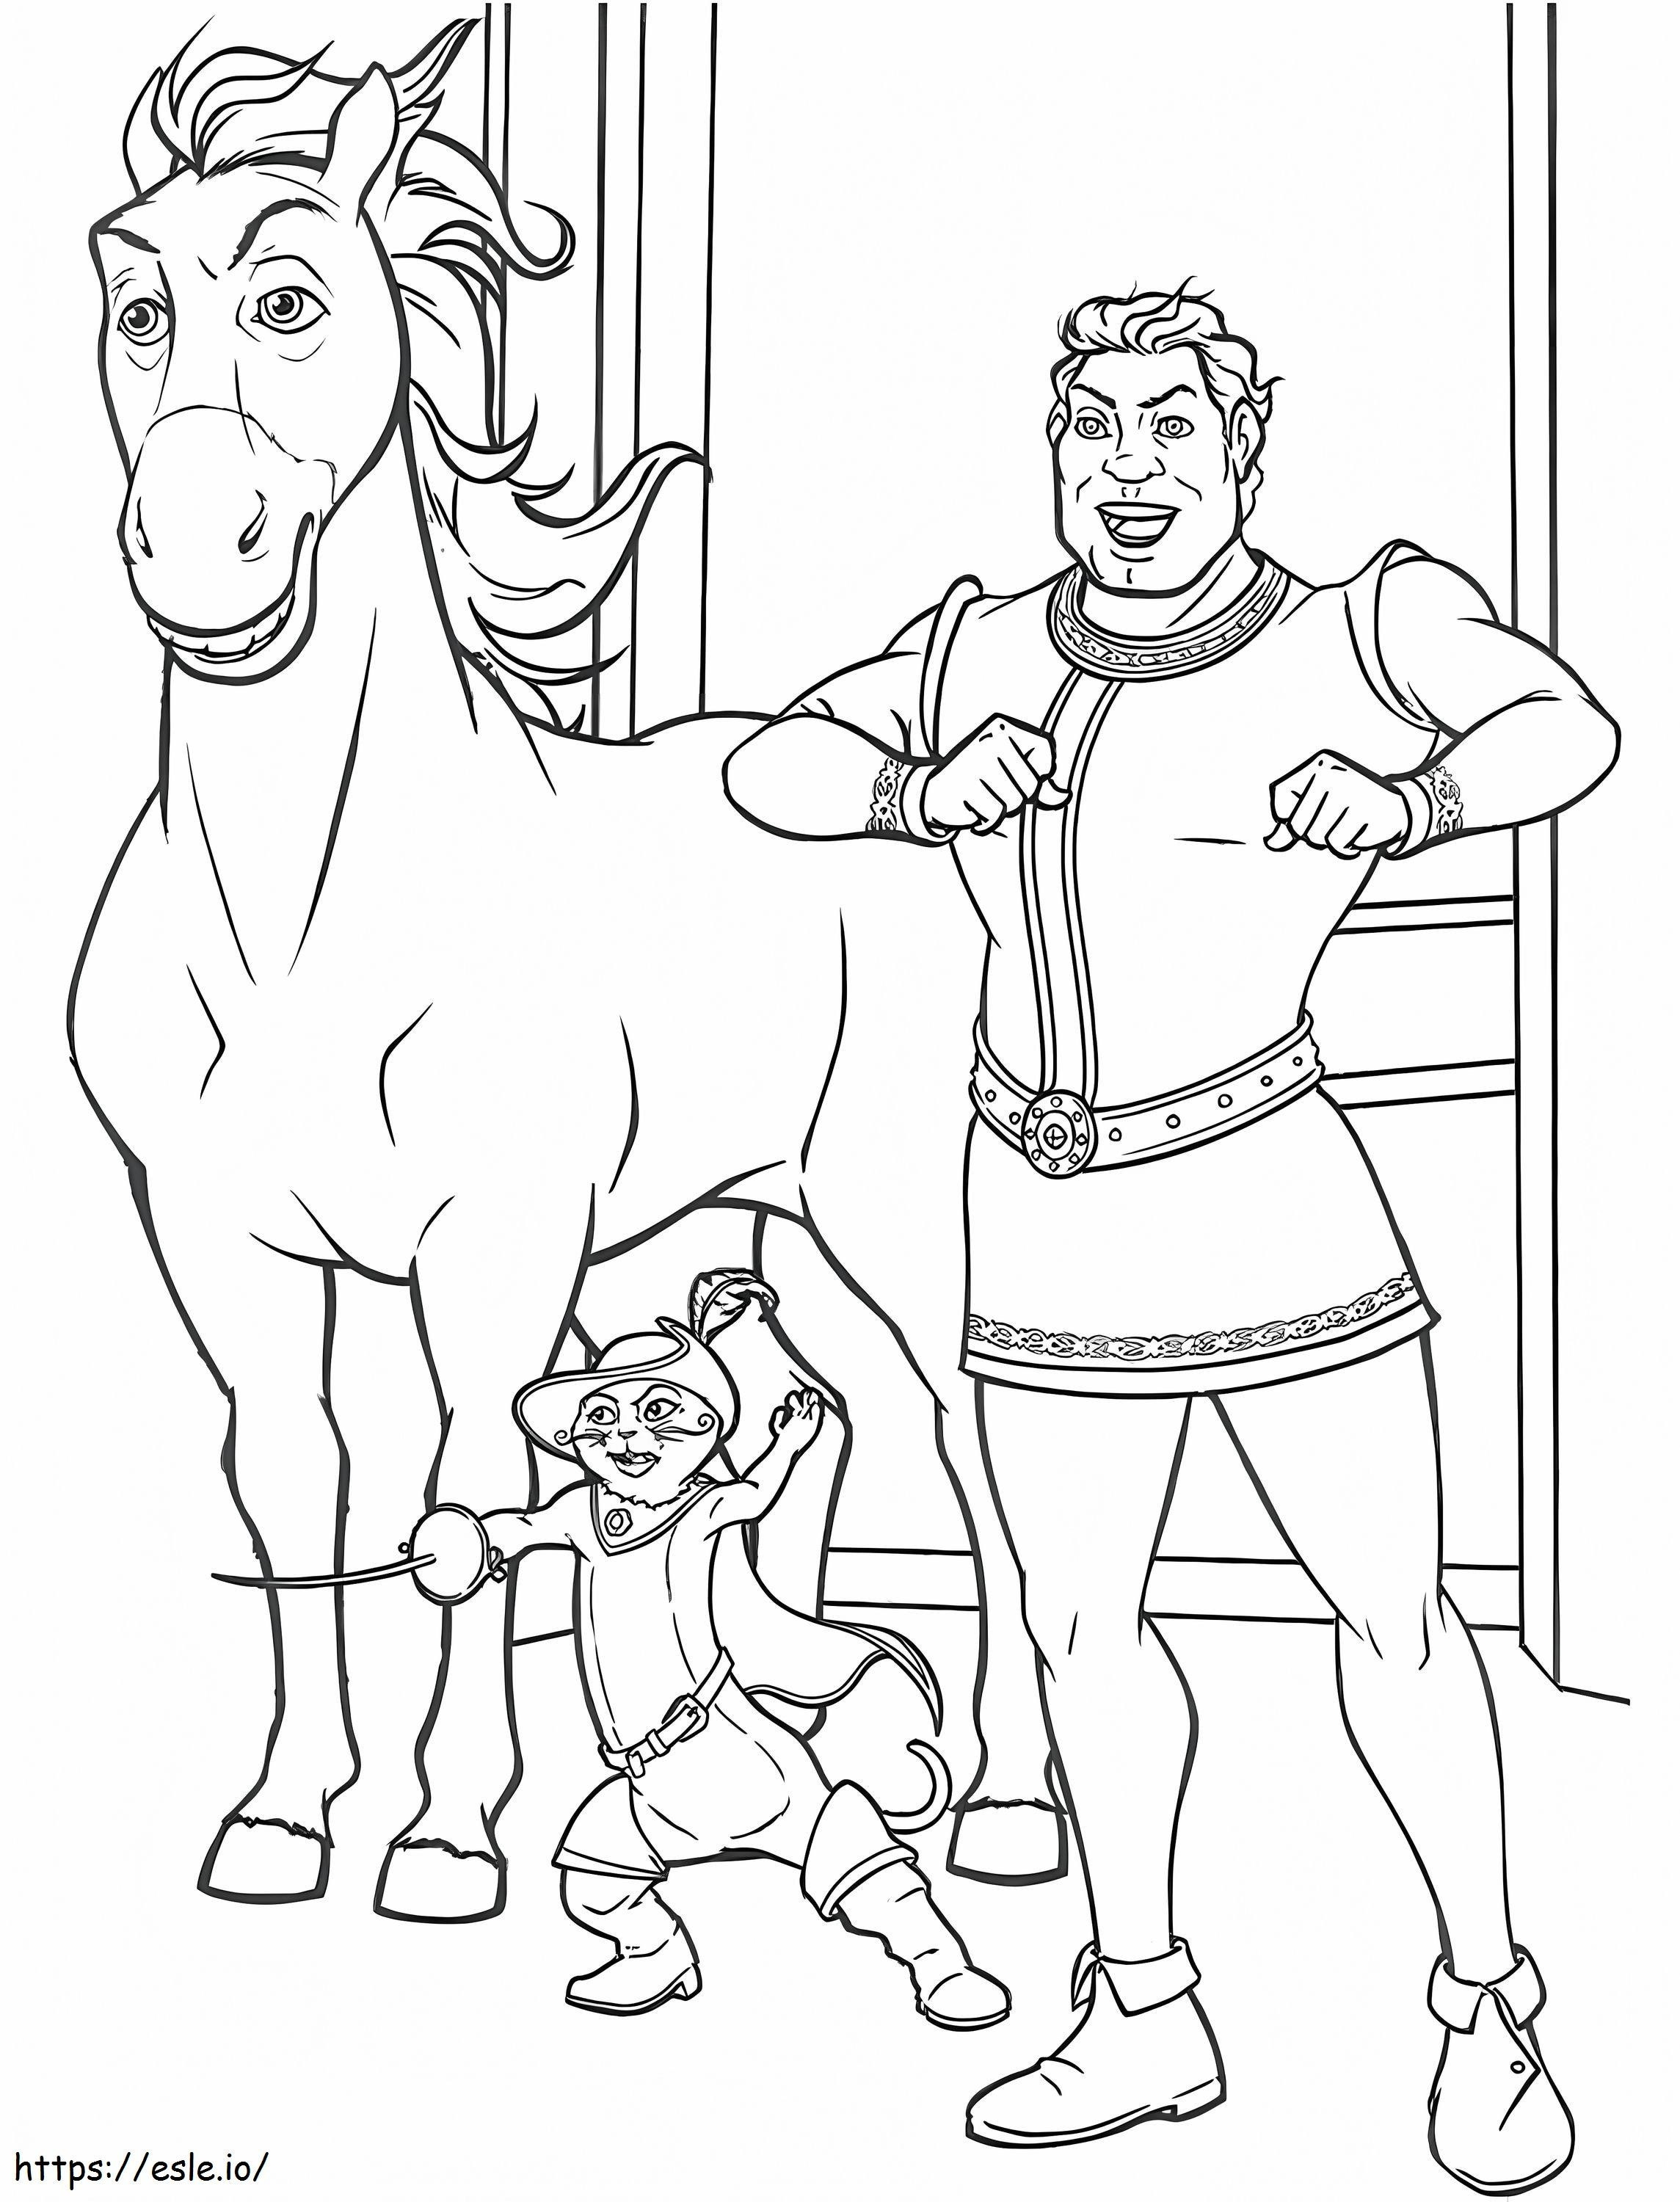 1569244334 Donkey Puss N Shrek A4 coloring page